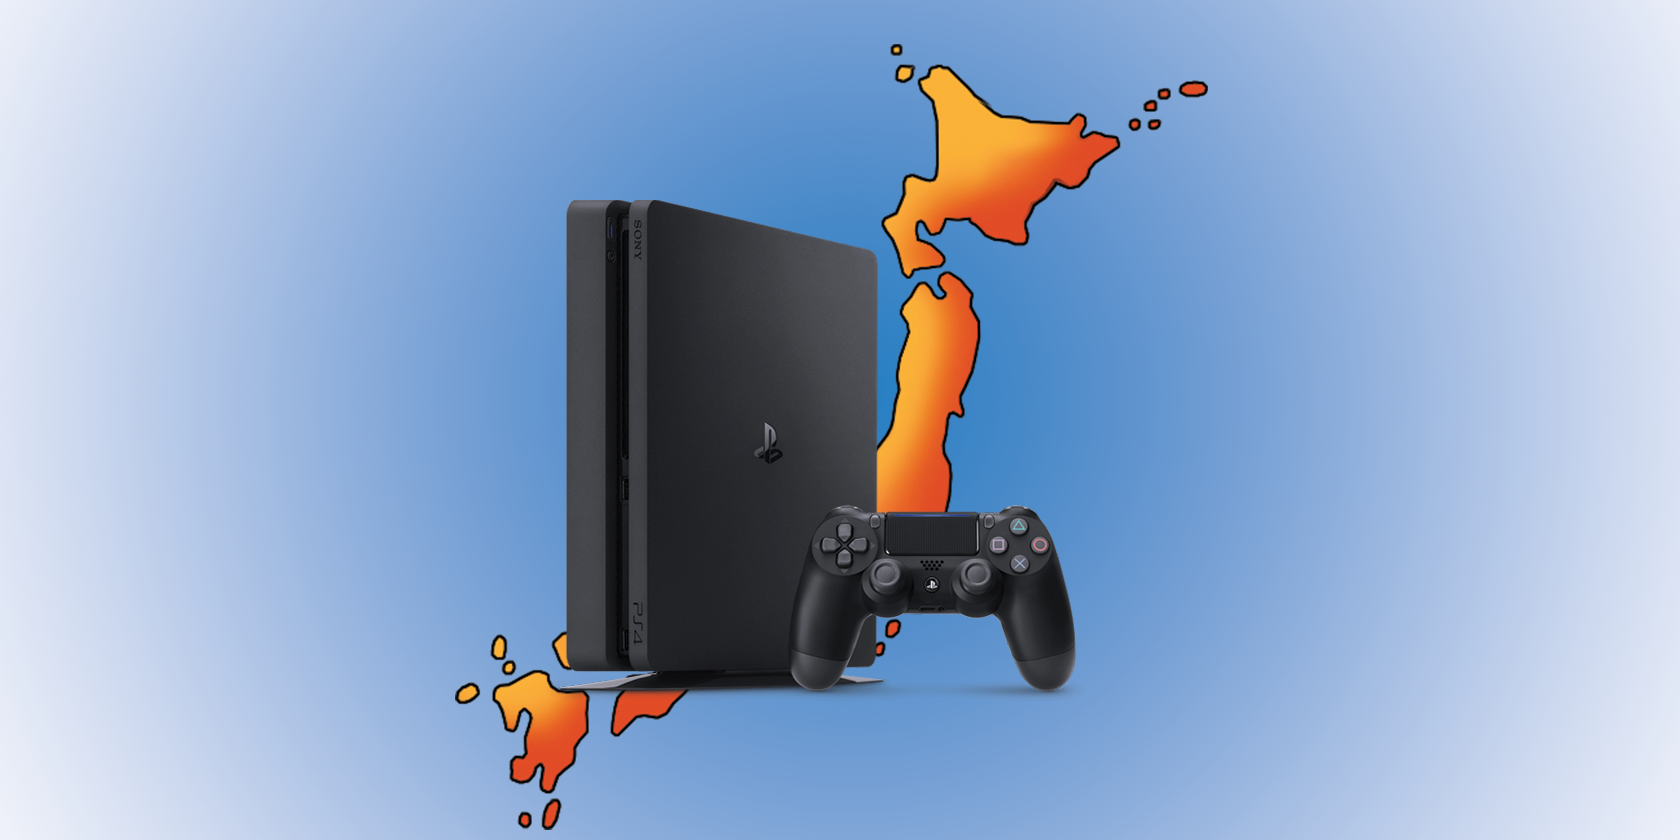 ps4 slim console on japanese map